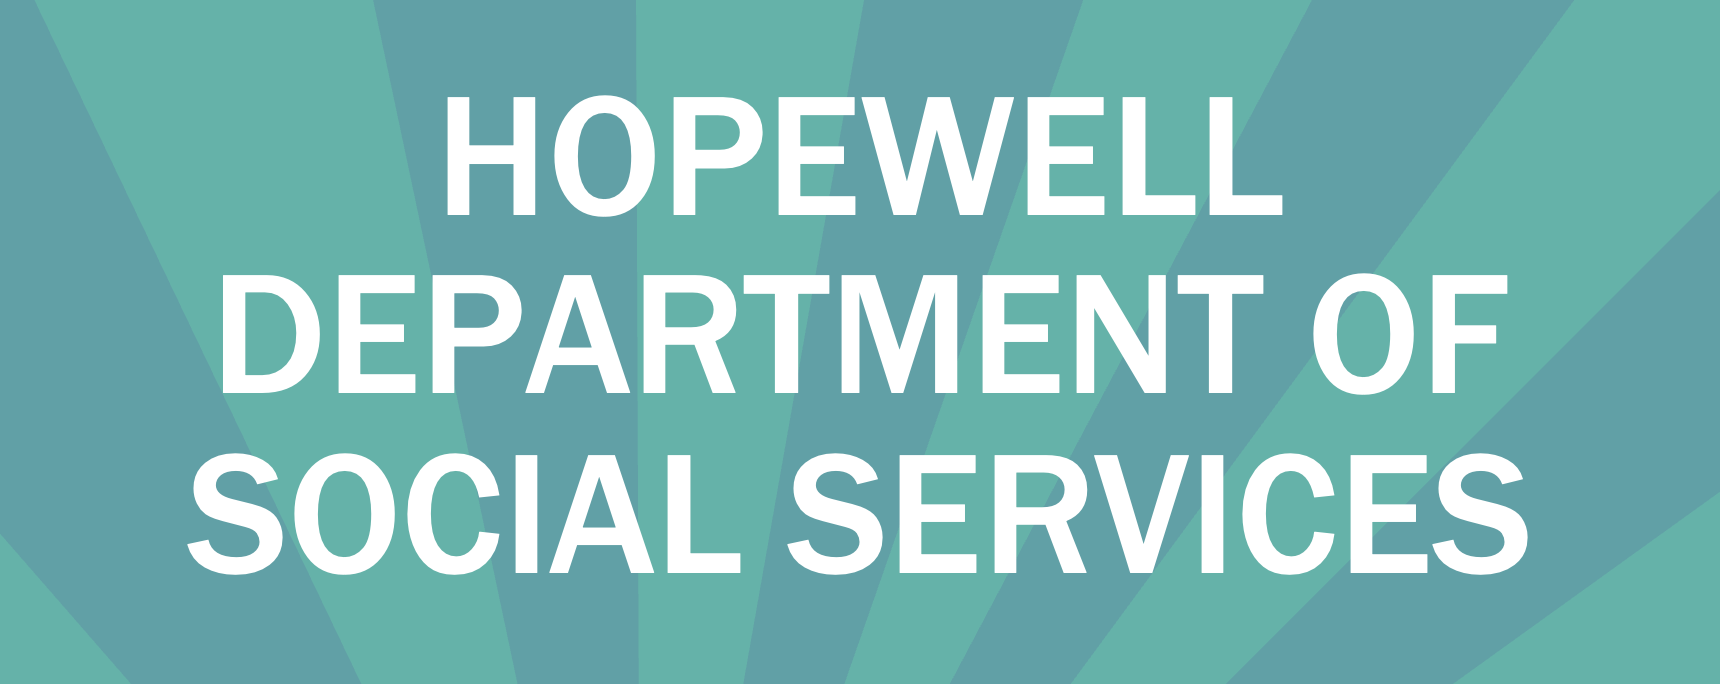 "Hopewell Department of Social Services"